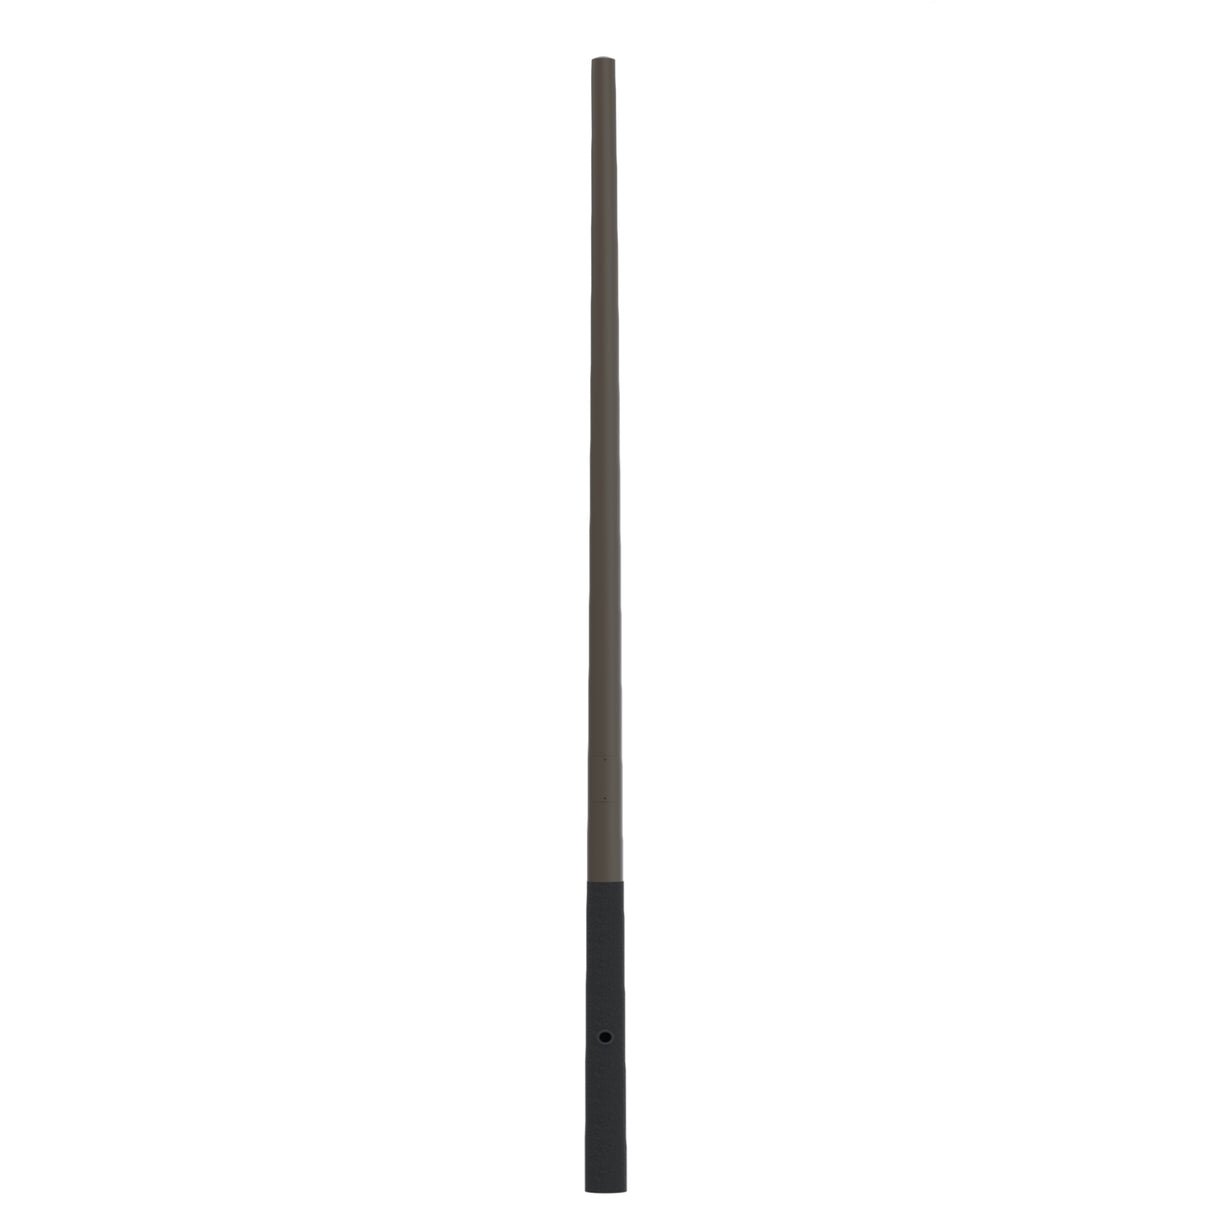 18' Above Grade x 6.0" Base OD x 4.0" Top OD x 0.156" Thick, Round Tapered Aluminum, Direct Burial Light Pole